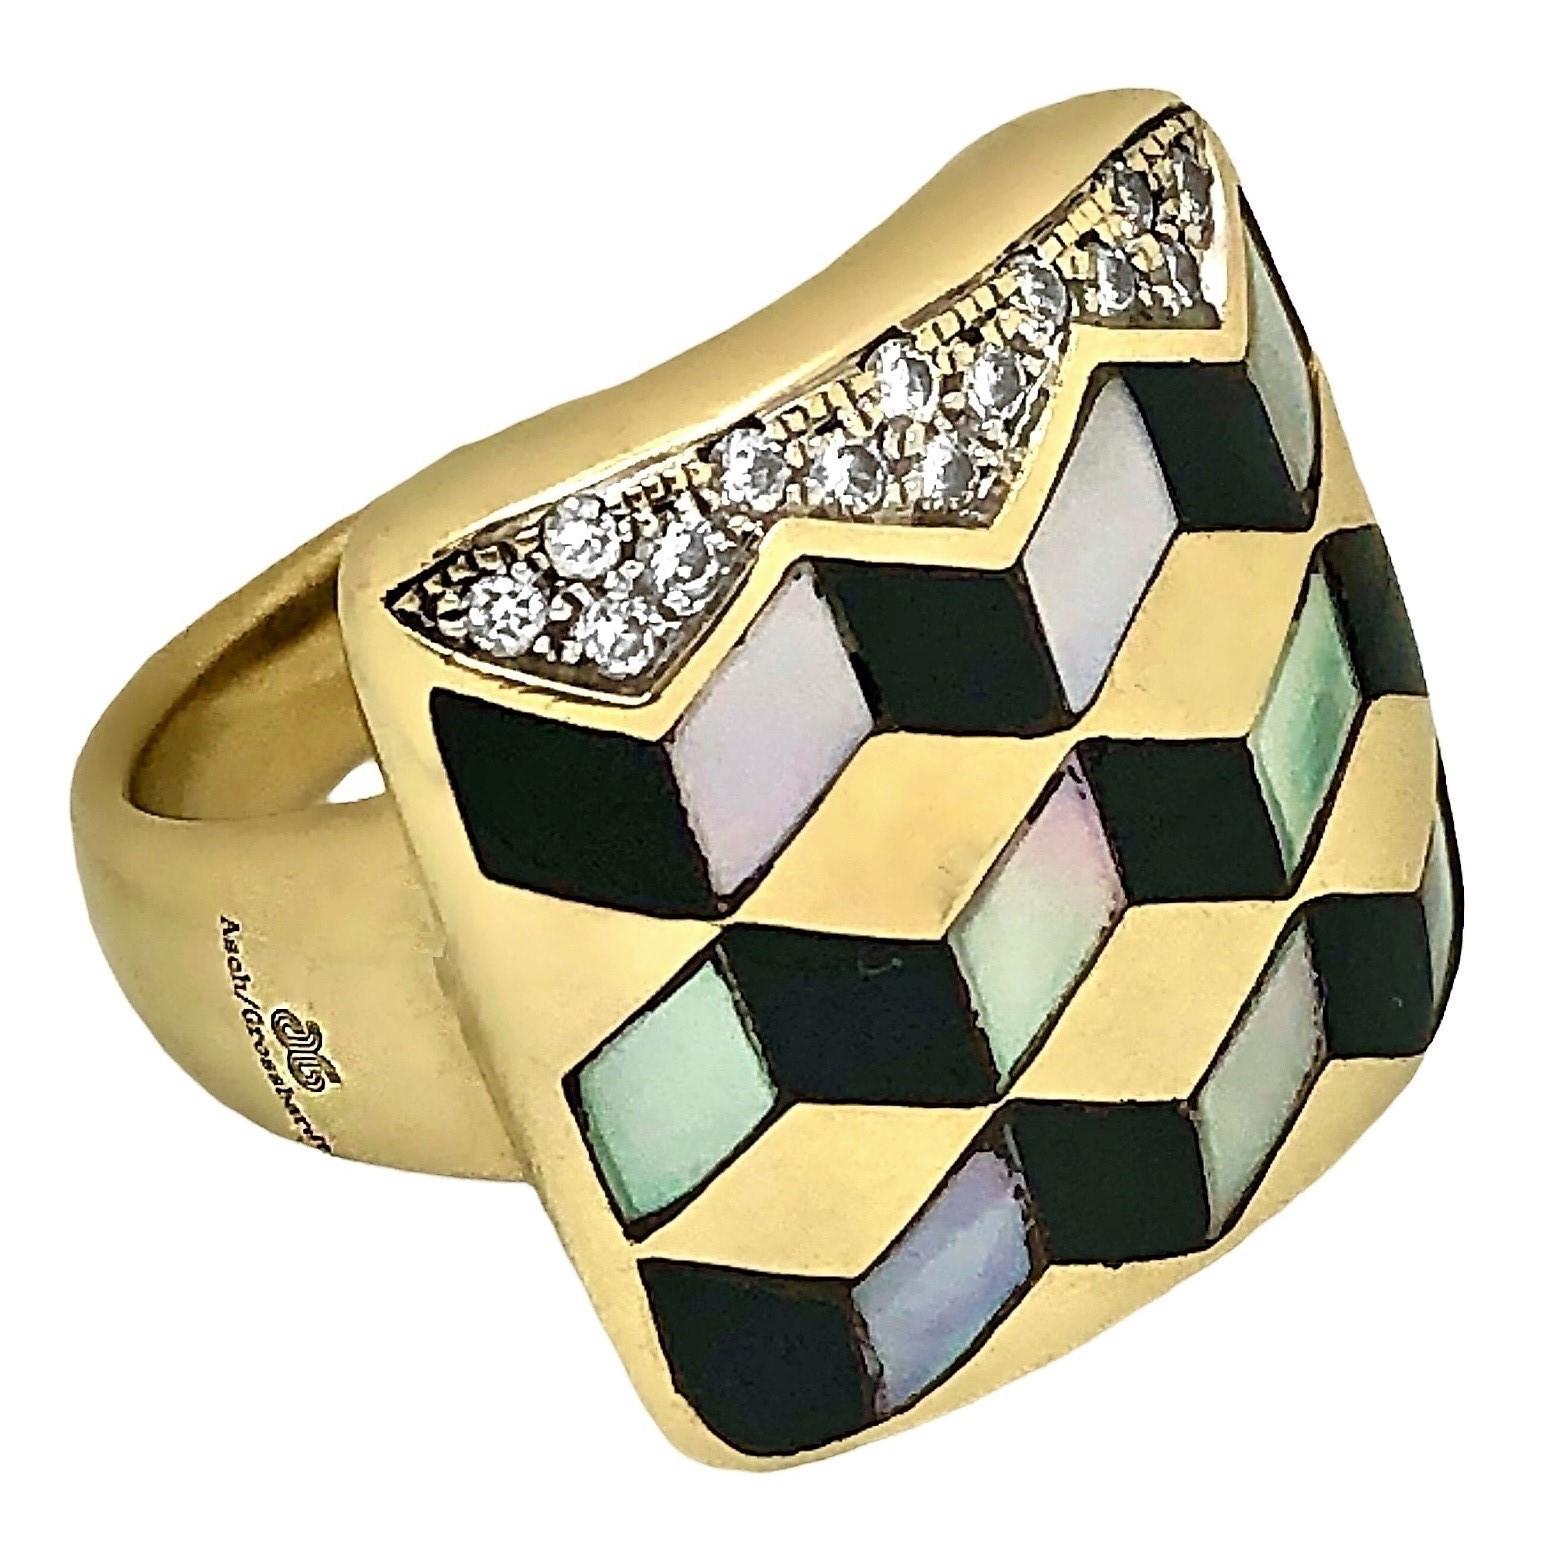 This intricately crafted Asch Grossbardt 14K yellow gold, diamond, onyx and Mother of Pearl fashion ring creates the optical  illusion of being three dimensional. As with all Grossbardt pieces, the precious stone inlay work is the very finest and,